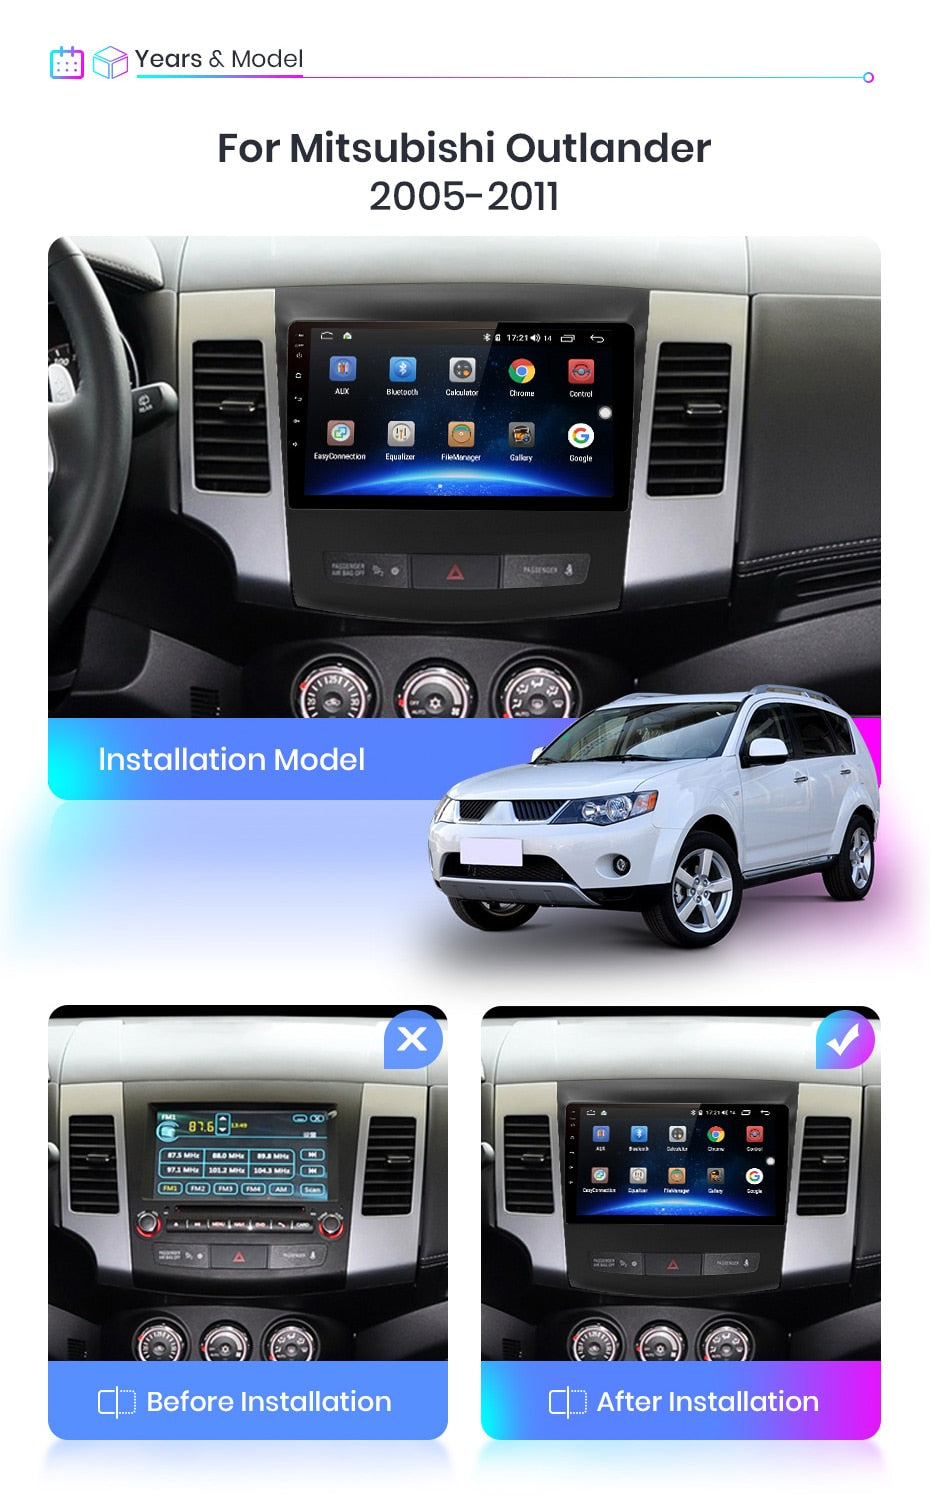 Android 11.0 2G+32G Car Stereo For Mitsubishi Outlander Reverse camera Supports Apple CarPlay Android Auto, GPS NZ Map For xl 2 2005-2011 4007